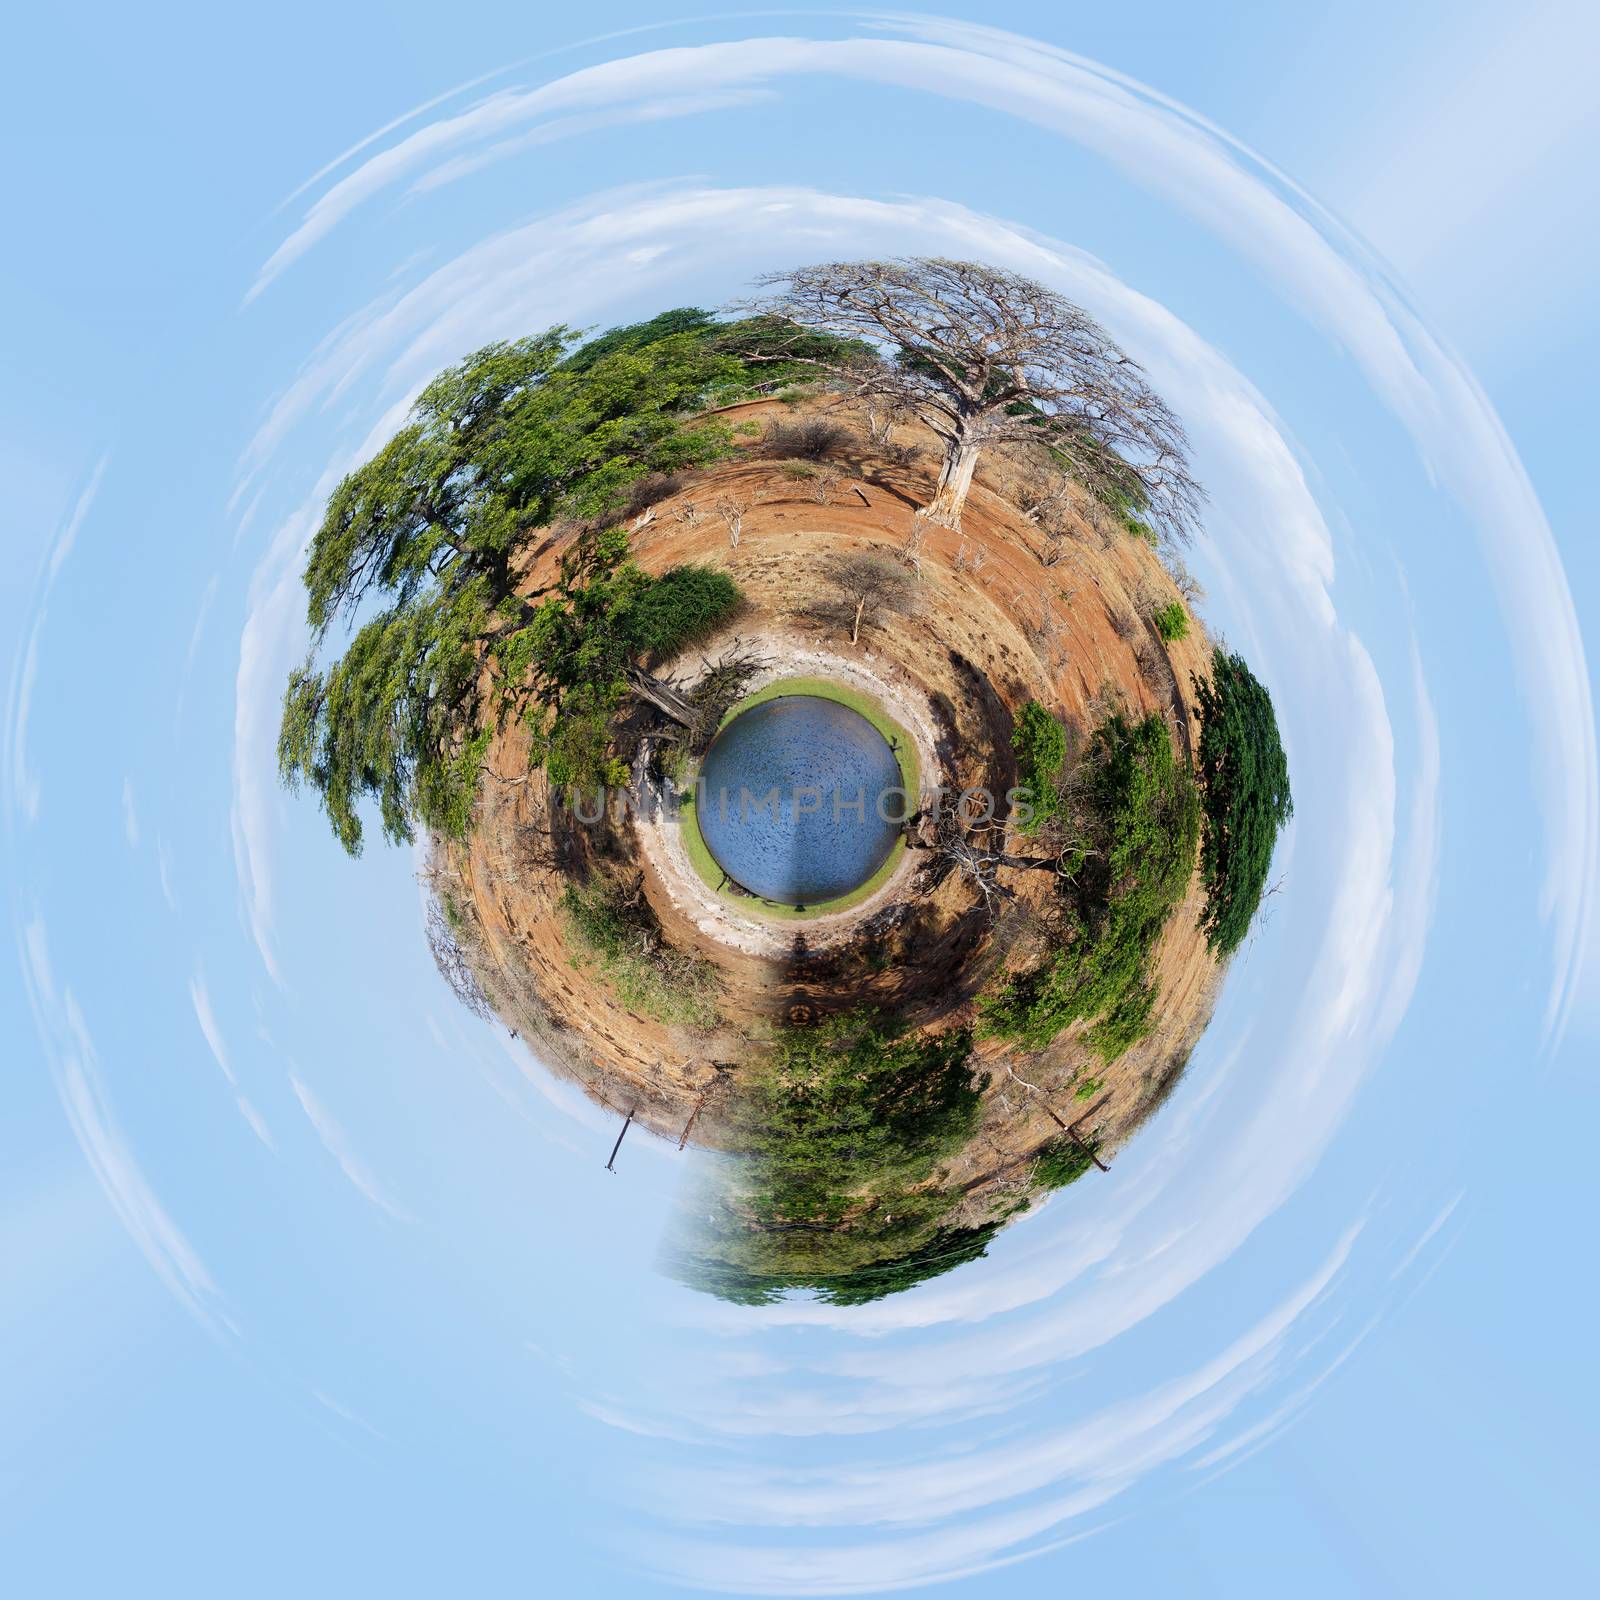 little planet of Chobe river in Botswana, Little planet with africa landscape, ecology concept. Tiny green projection. Save Africa ecology concept.